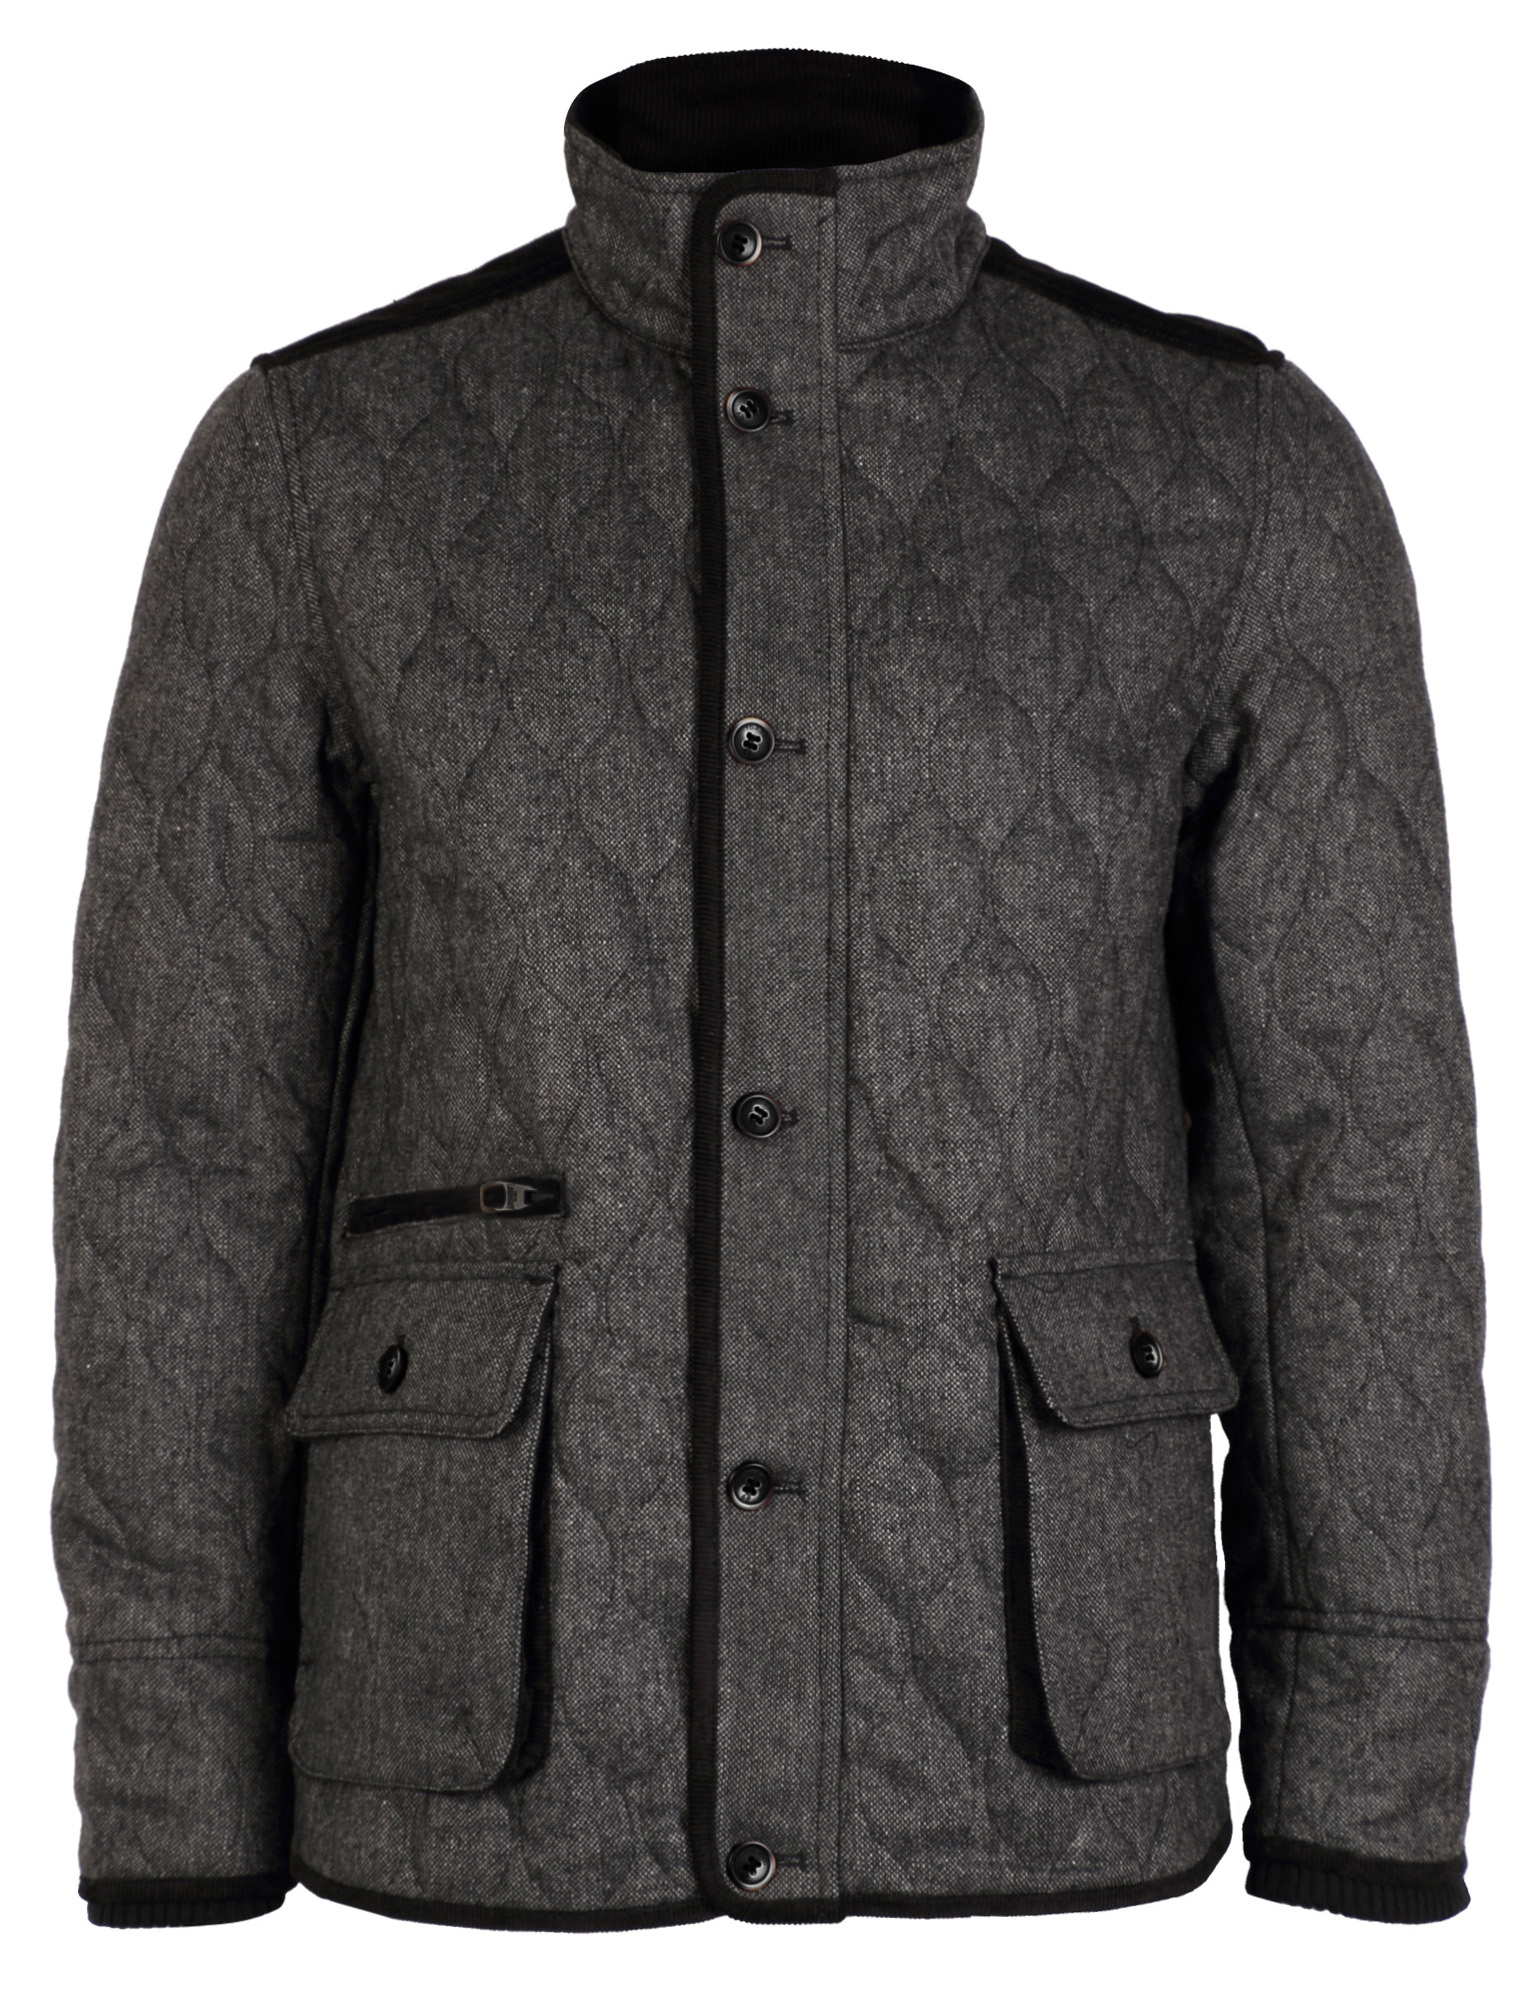 Men's Tokyo Laundry Cumberland wool blend grey quilted jacket size S ...